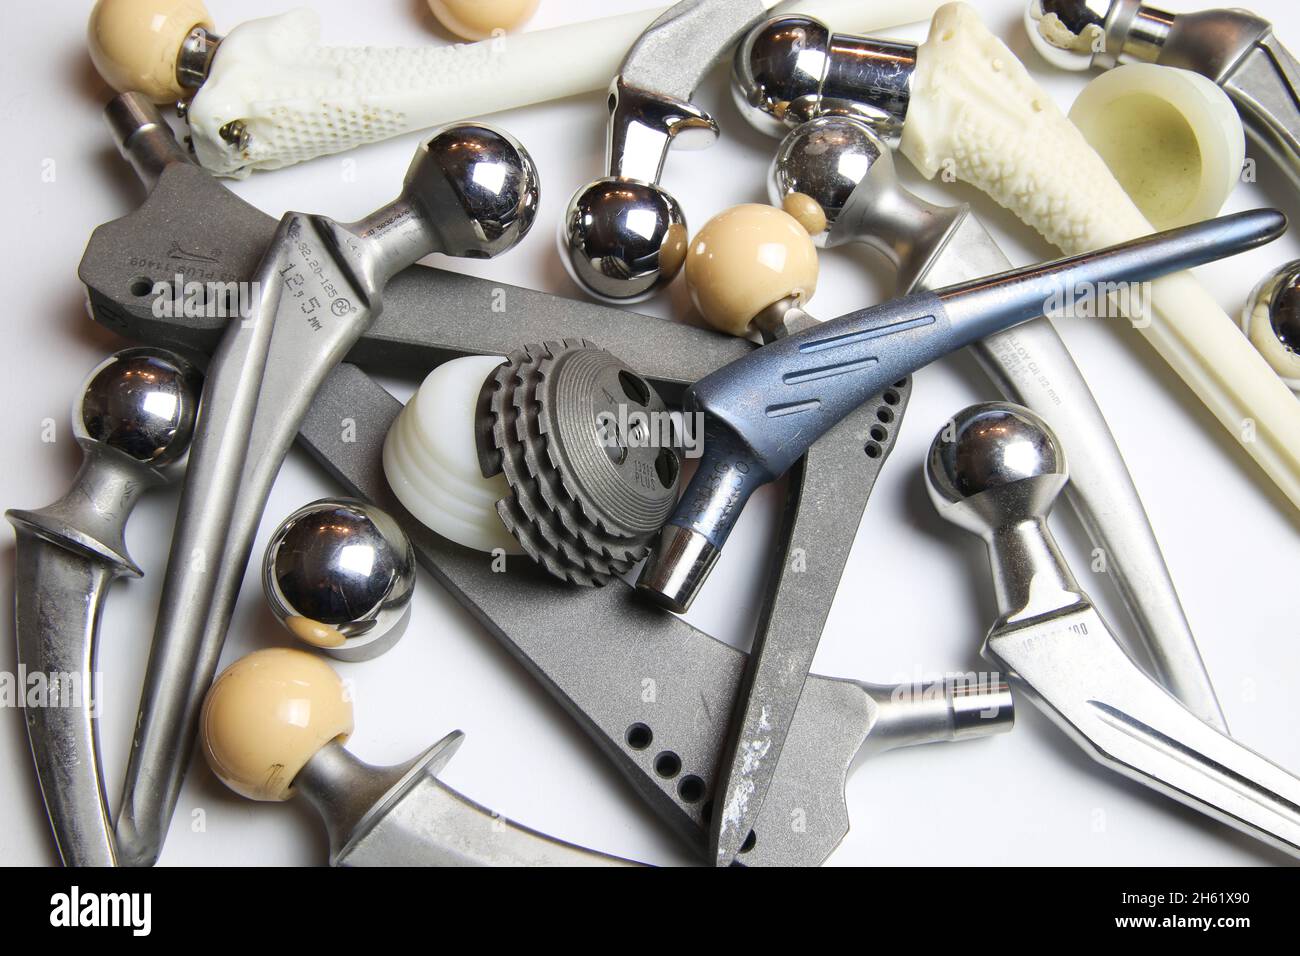 Viersen, Germany - June 9. 2021: Closeup of group different implant parts for orthopedic artificial hip joint replacement surgery Stock Photo